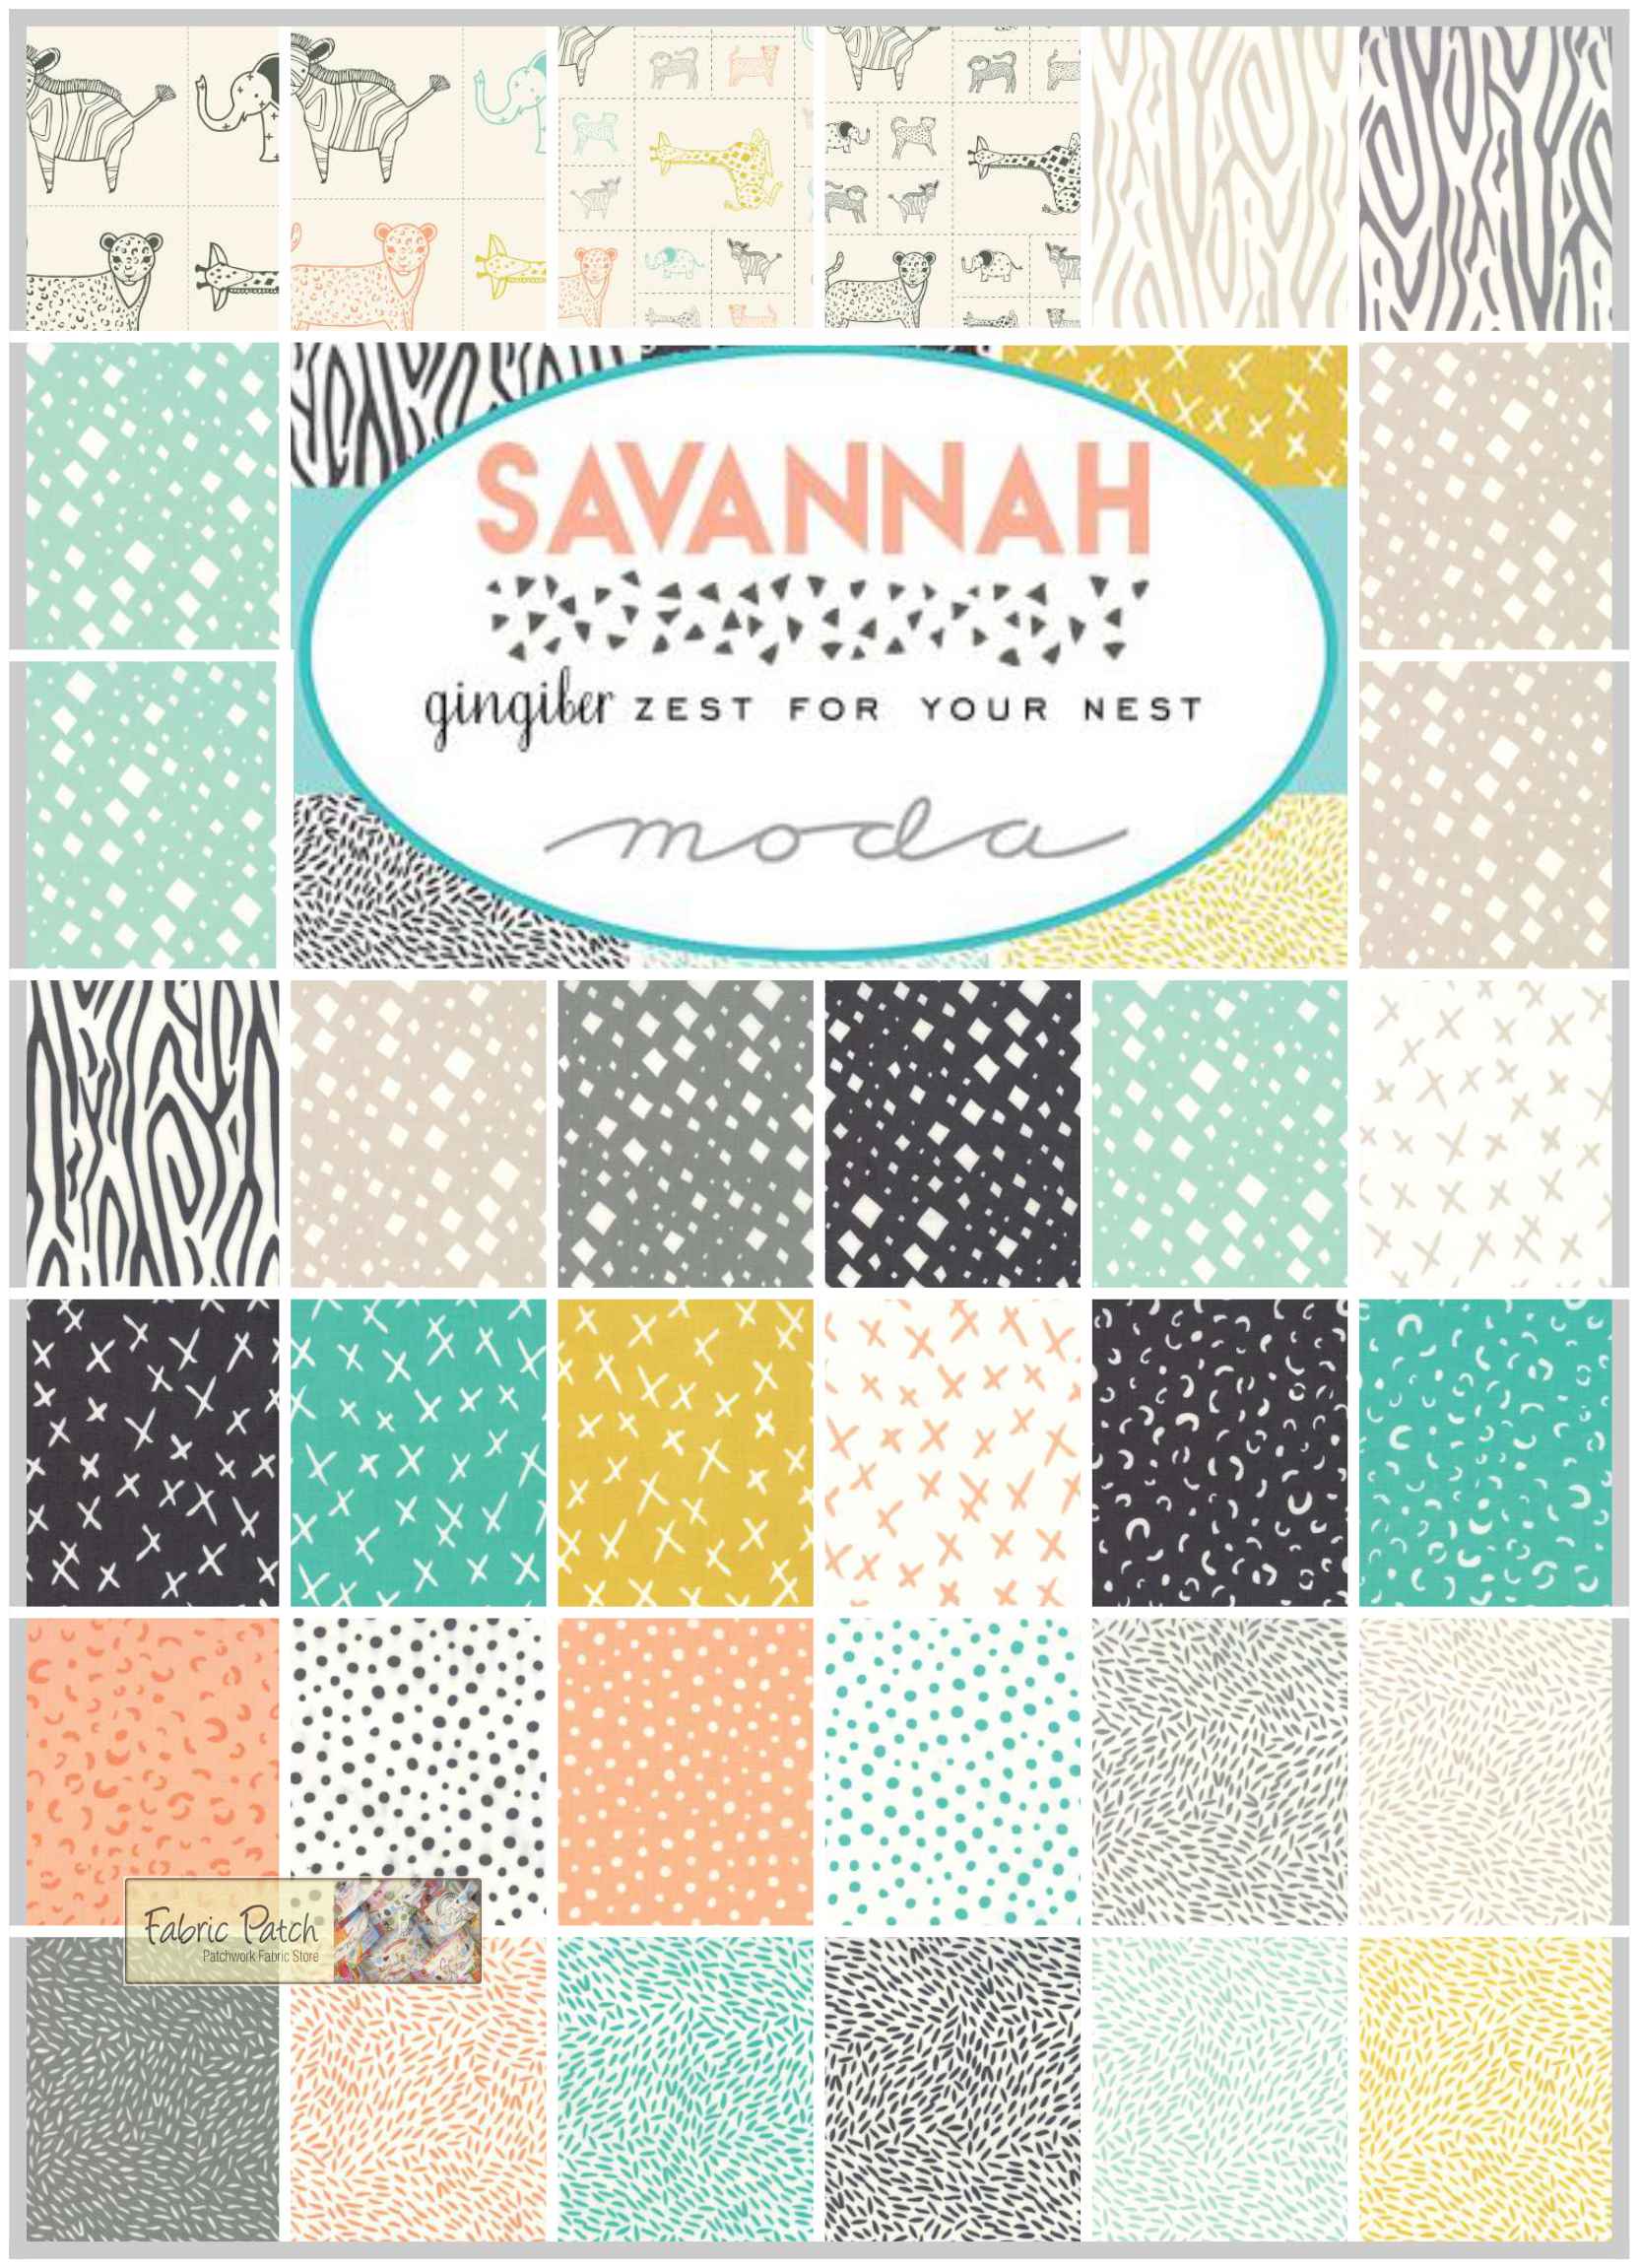 Savannah Mini Charms - Patchwork  Fabric by Gingiber for moda fabric